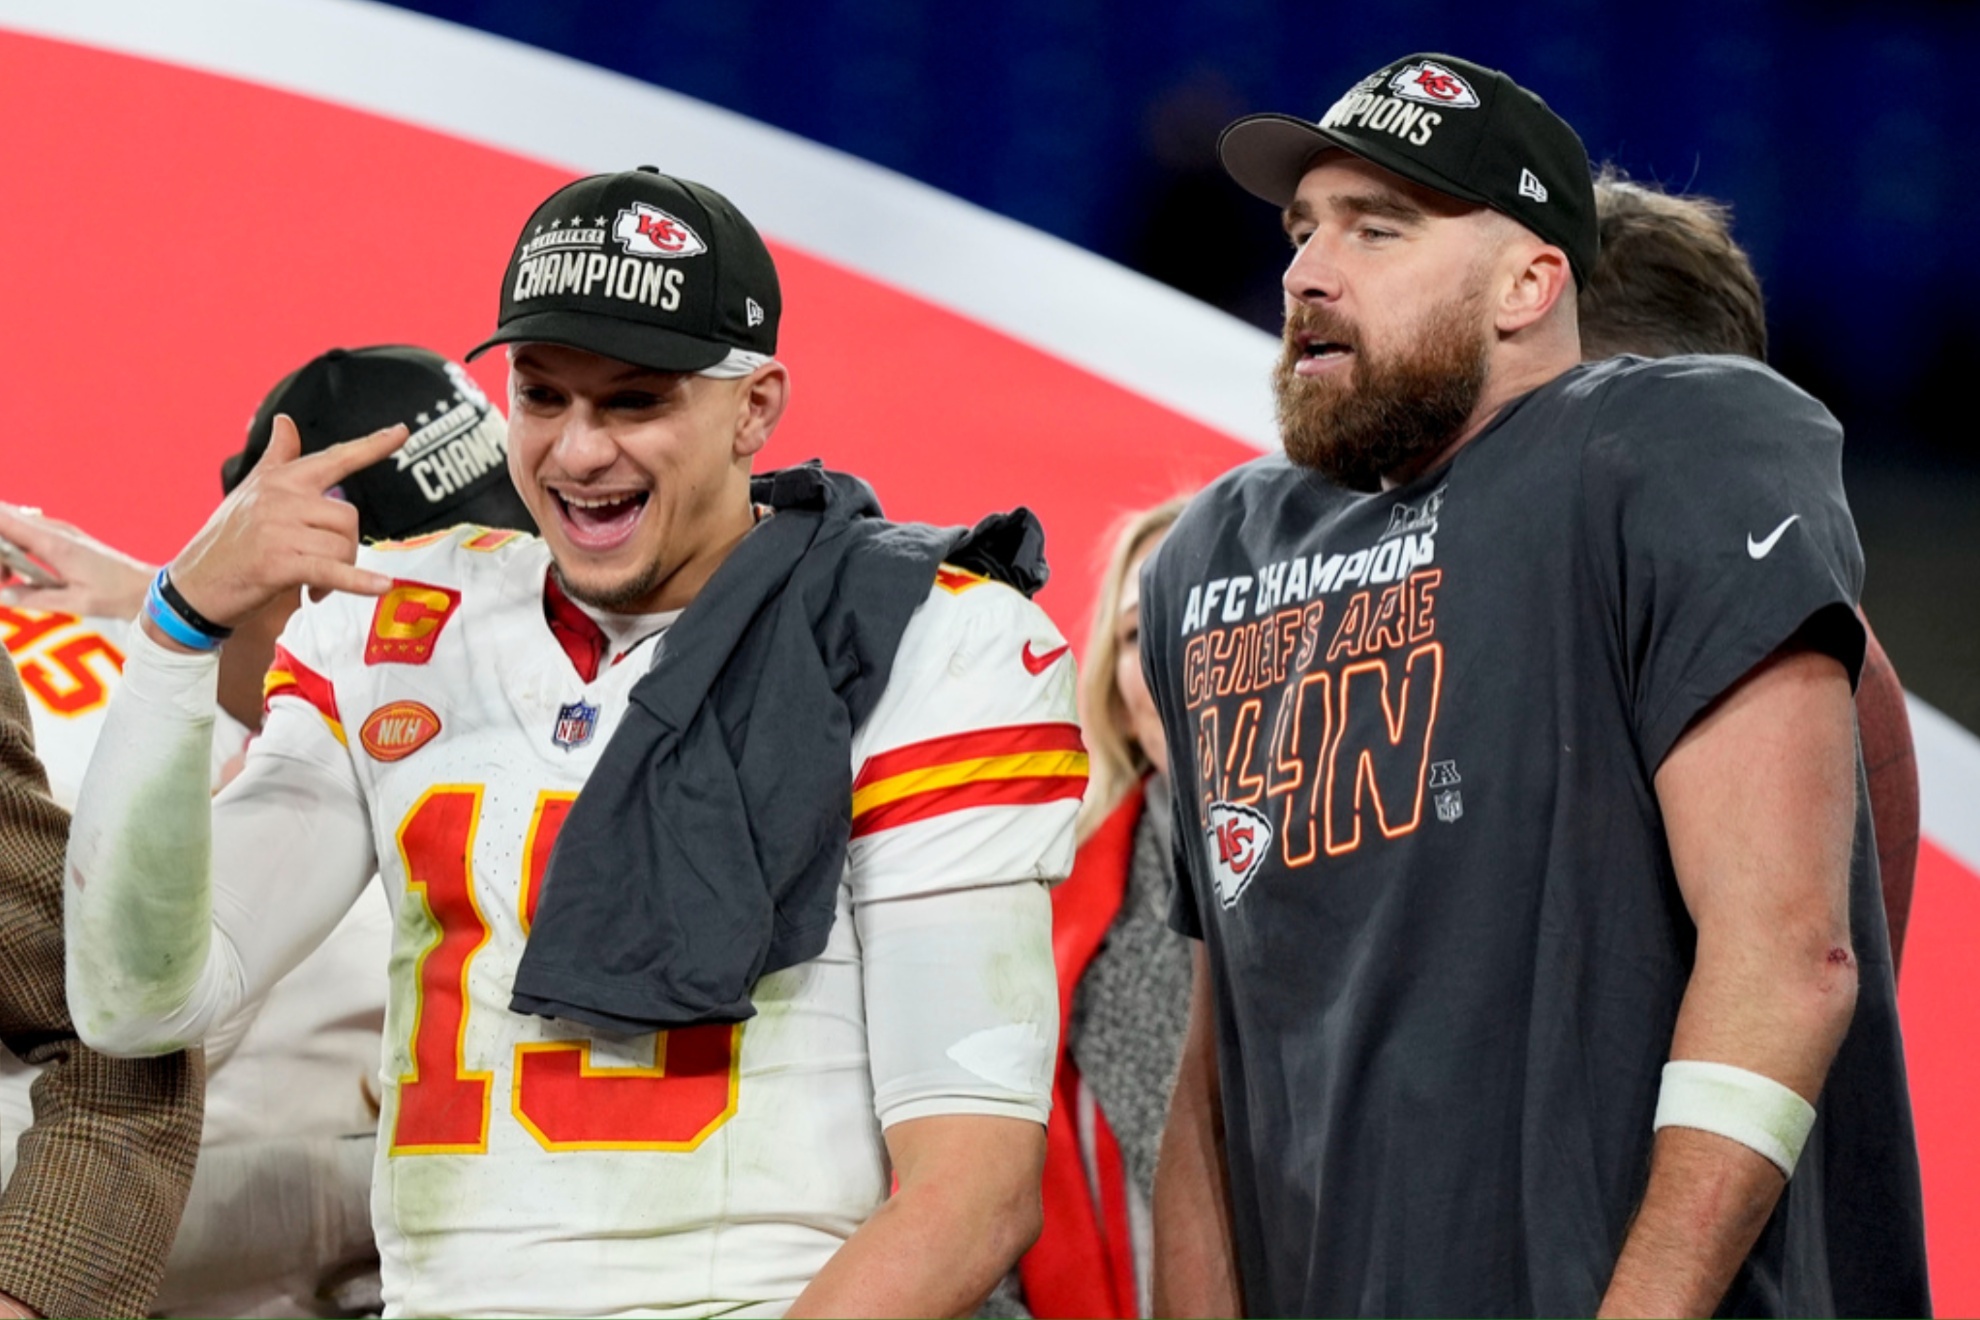 Patrick Mahomes' secret weapon: The insane trick play he's dying to unleash with Travis Kelce: The play is so risky that Mahomes himself has not dared to do it in an official game.